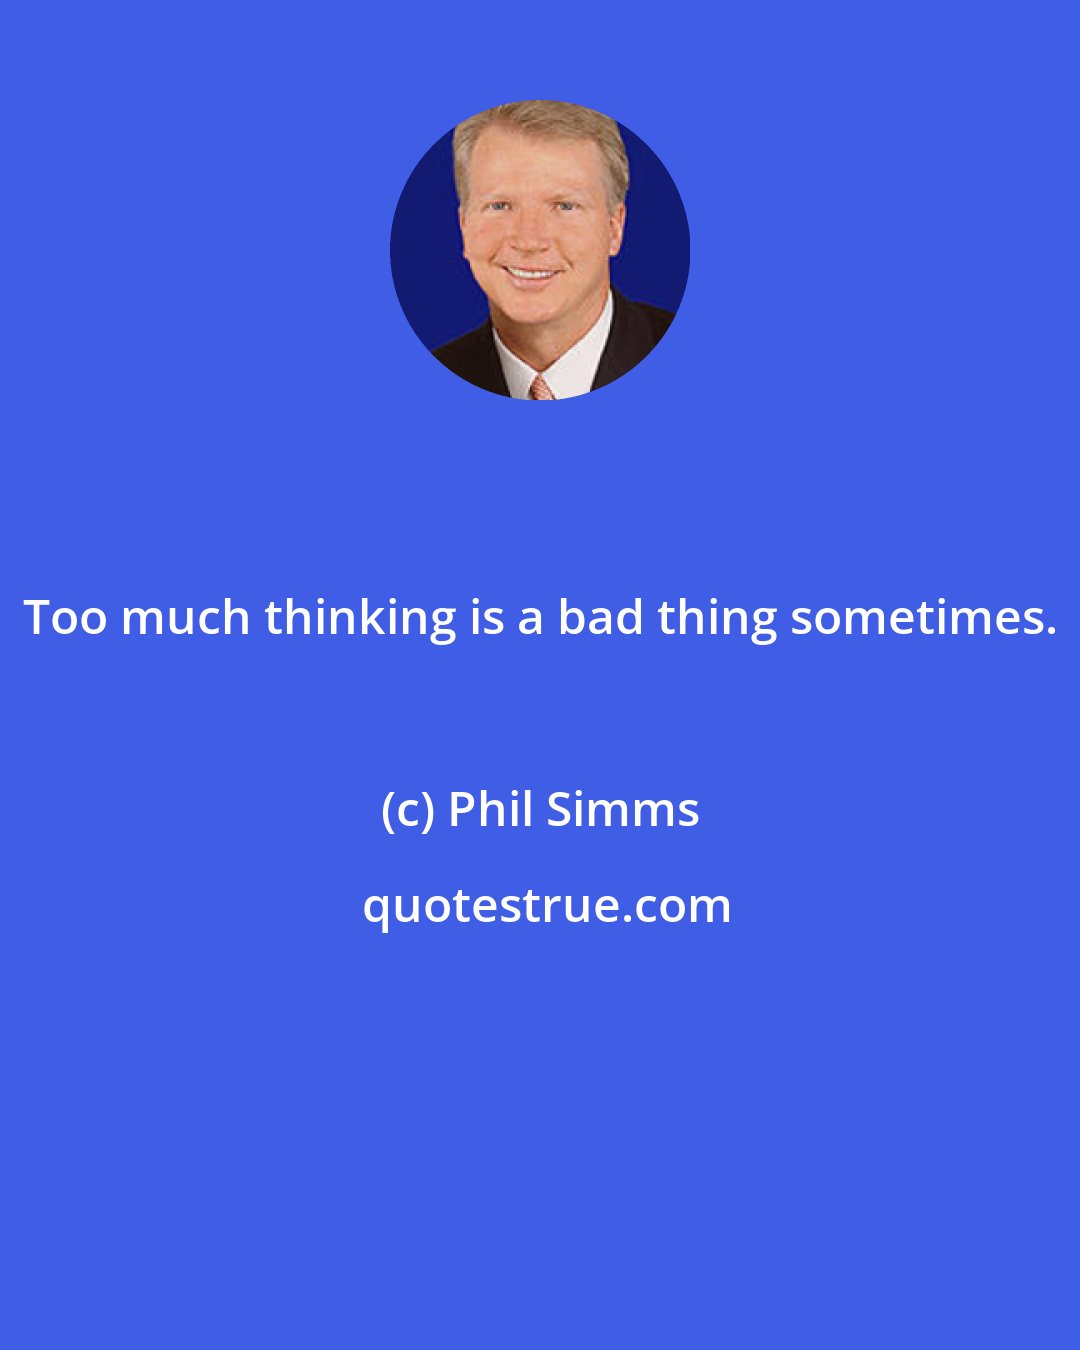 Phil Simms: Too much thinking is a bad thing sometimes.